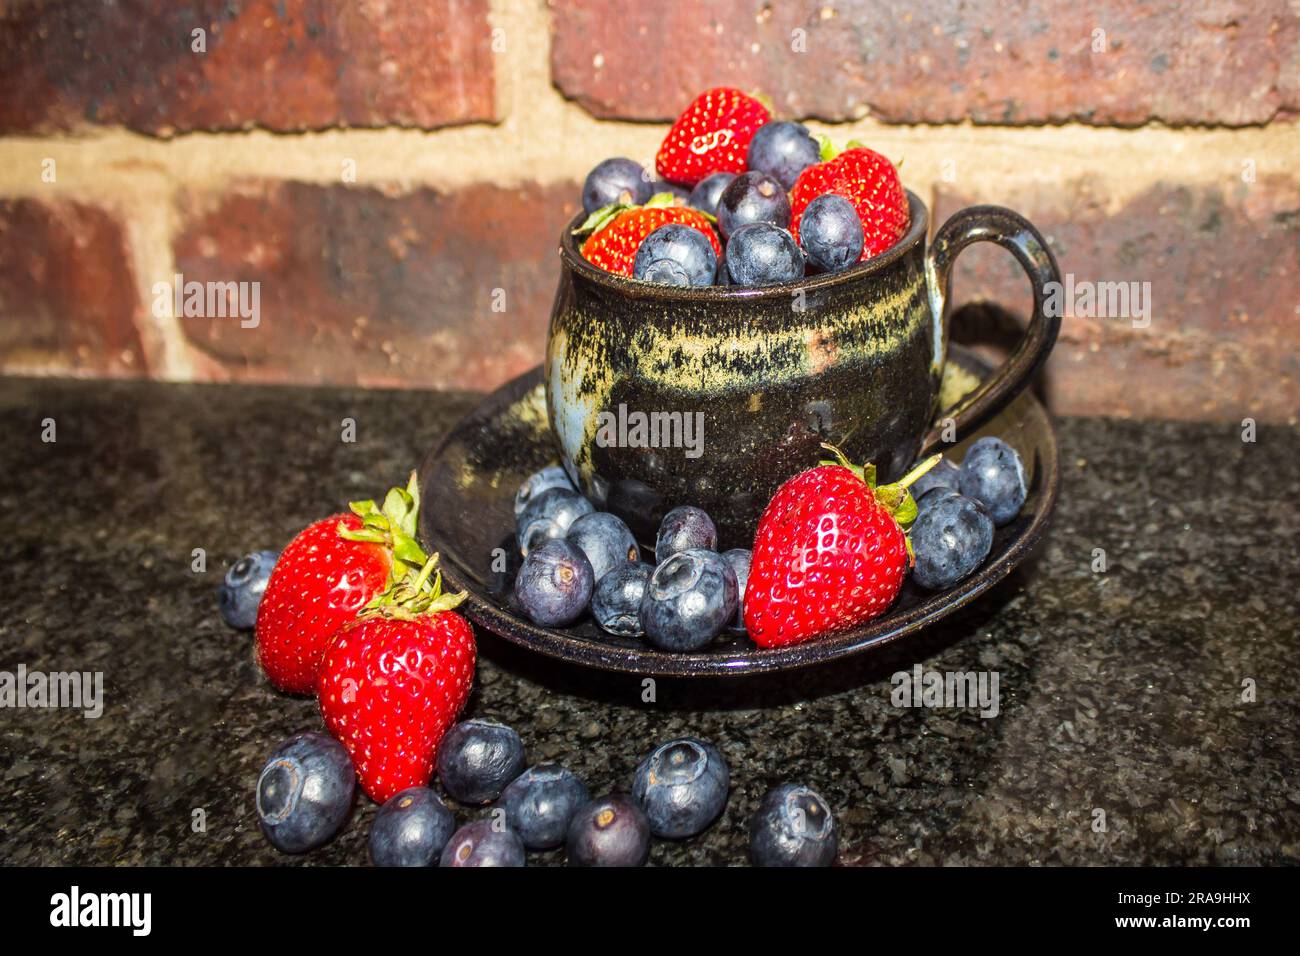 Teacup overflowing with Blueberries and Strawberries Stock Photo